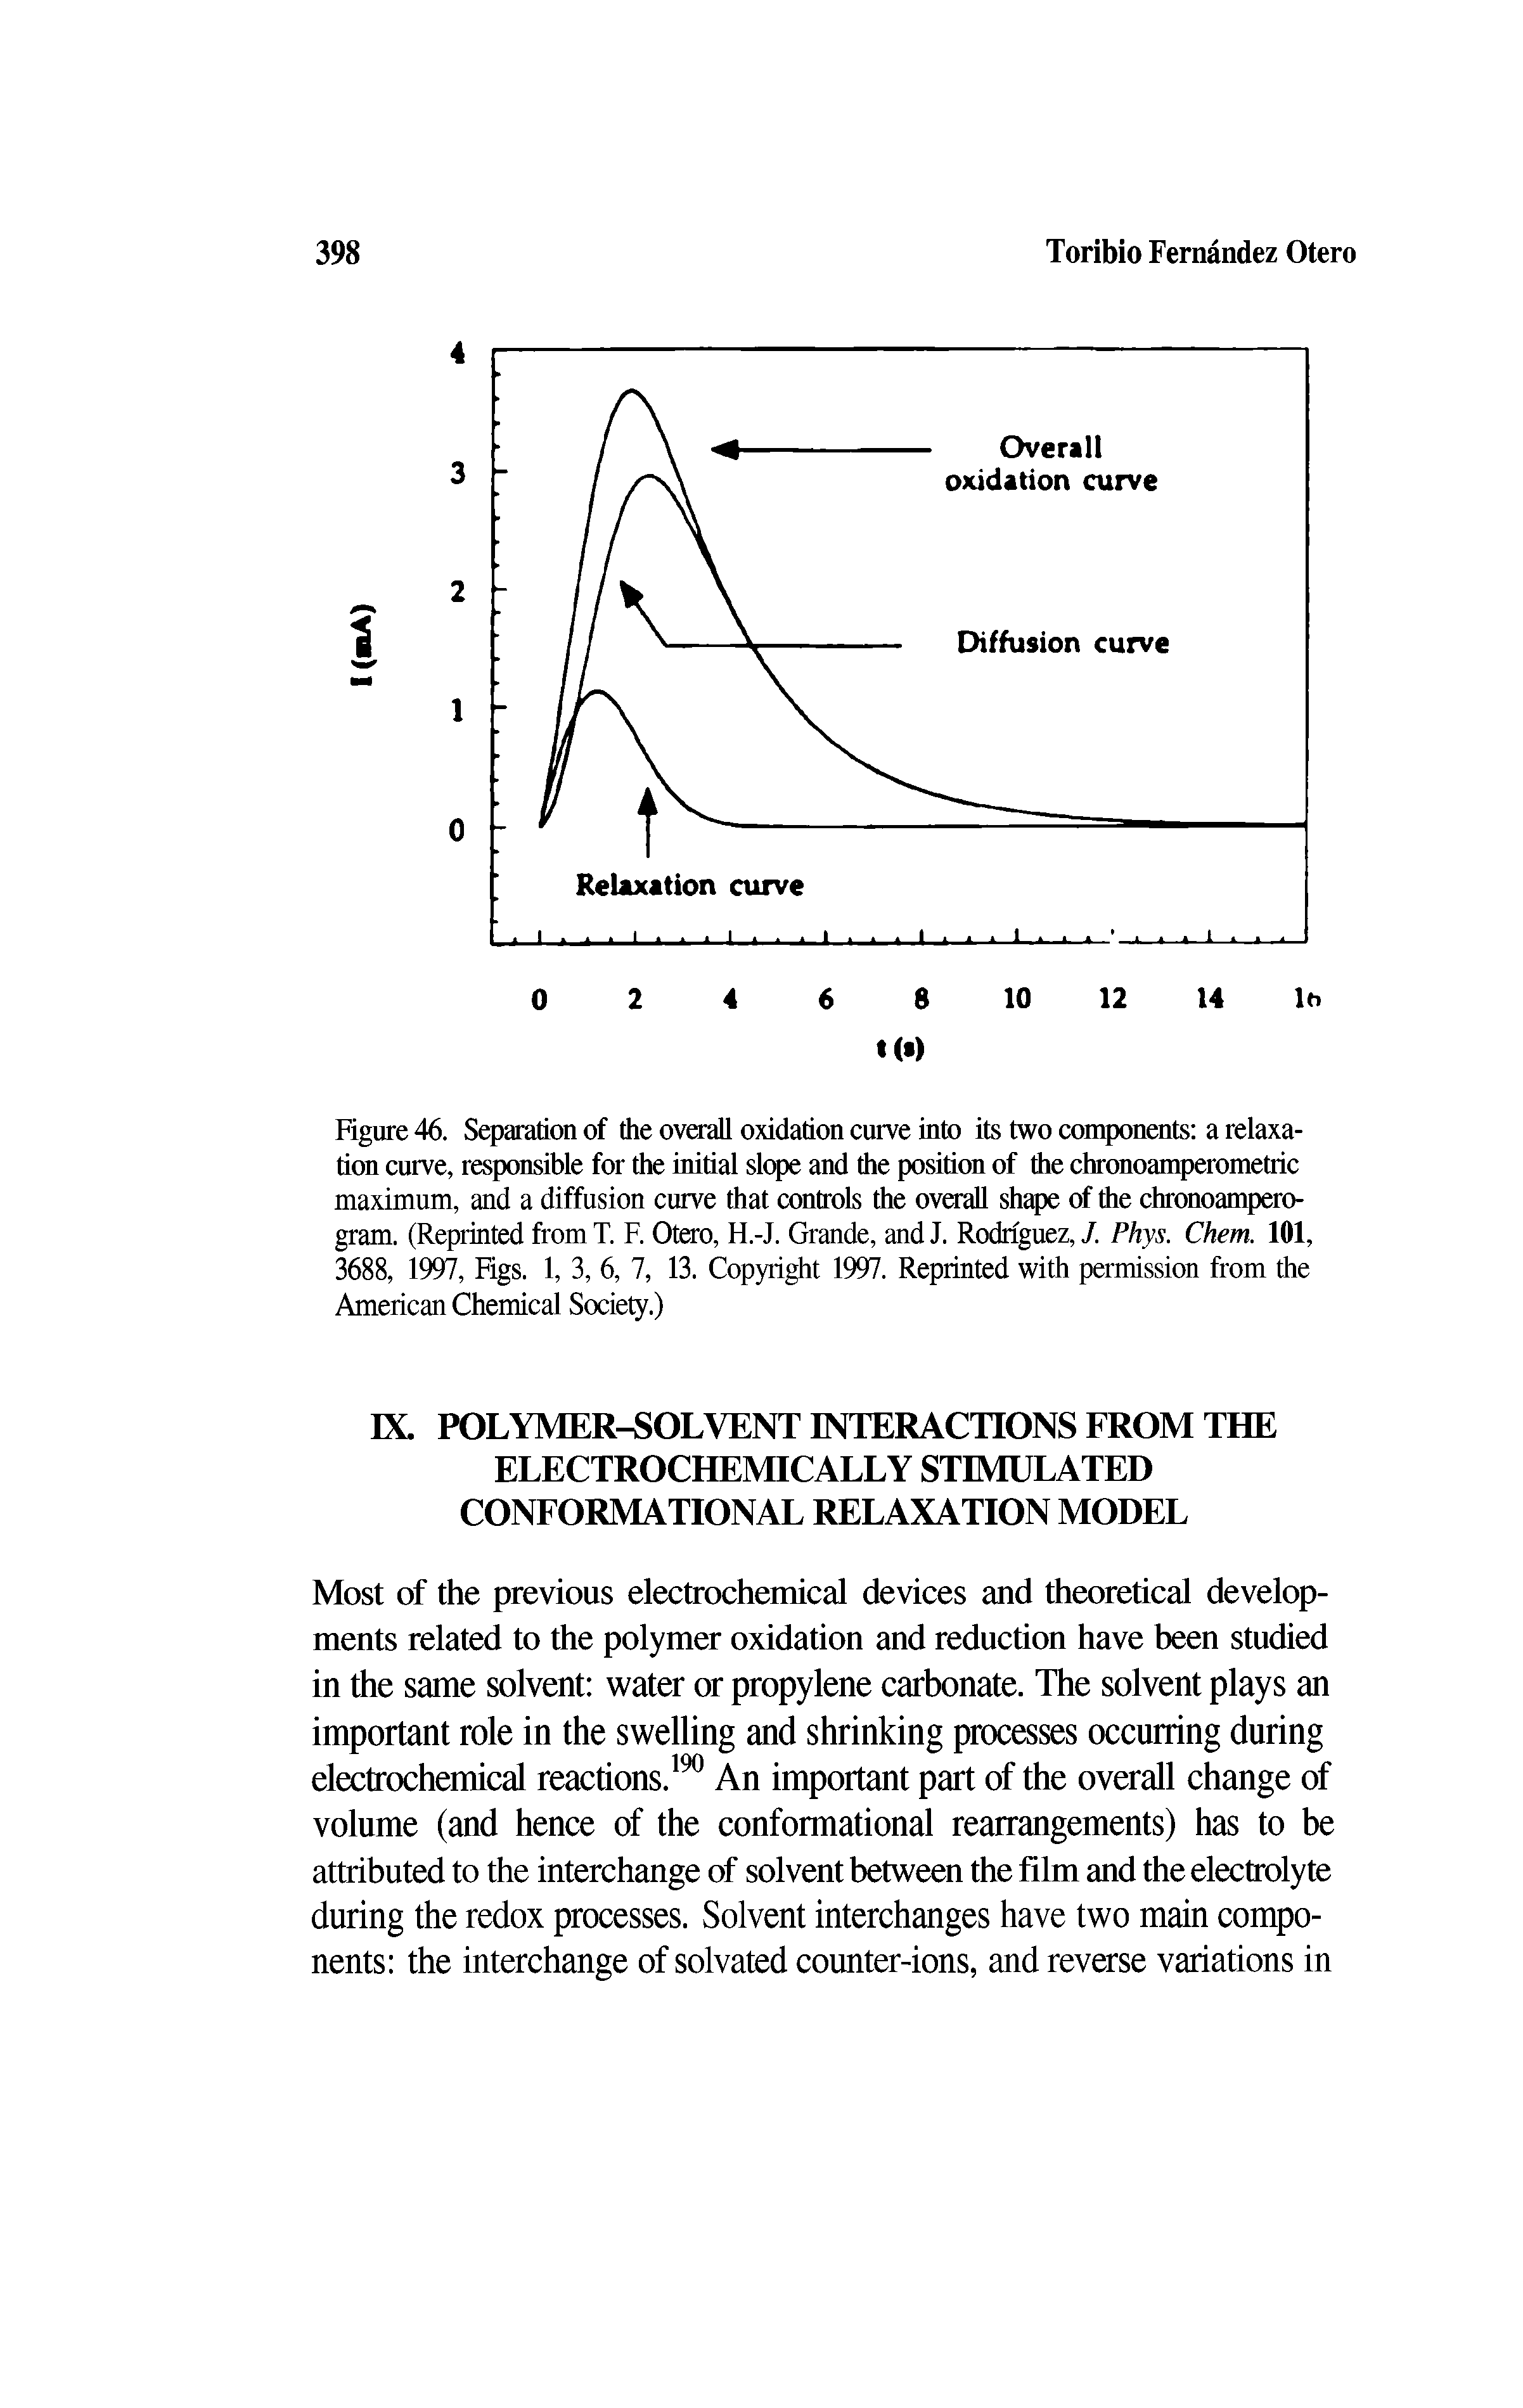 Figure 46. Separation of the overall oxidation curve into its two components a relaxation curve, responsible for the initial slope and the position of the chronoamperometric maximum, and a diffusion curve that controls the overall shape of the chronoampero-gram. (Reprinted from T. F. Otero, H.-J. Grande, and J. Rodriguez, J. Phys. Chem. 101, 3688, 1997, Figs. 1, 3, 6, 7, 13. Copyright 1997. Reprinted with permission from the American Chemical Society.)...